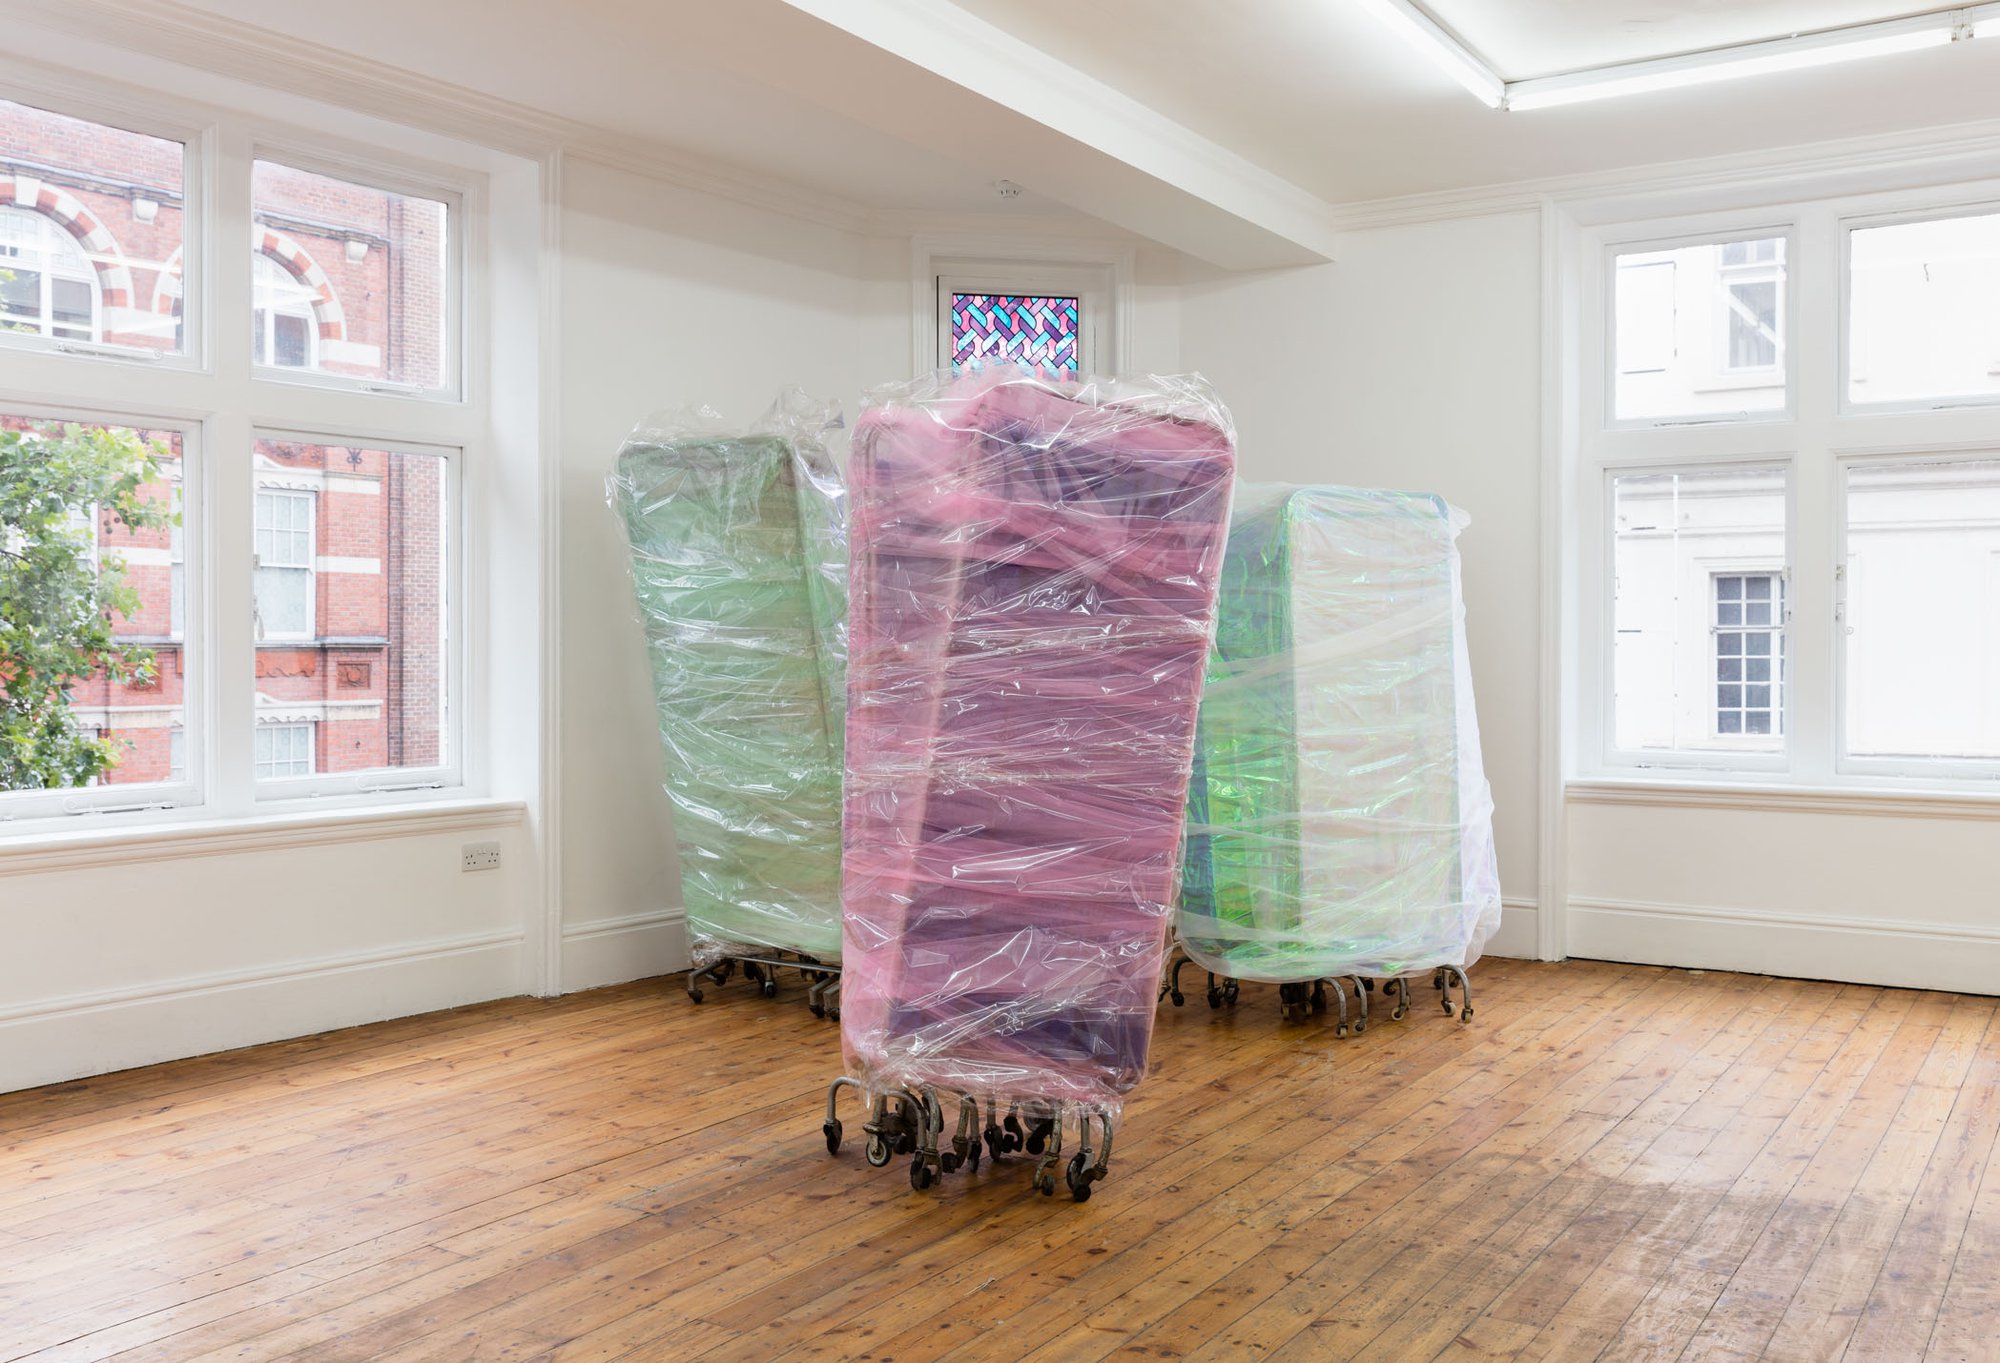 Ian Law, There was a body, I was there, was a body, medical privacy screens with soft toy fur fabric, curtain netting and organza, gift wrapped, 170 x 130 x 55 cm (66 7/8 x 51 1/8 x 21 5/8 in), 2016. Installation view, The Cypress Broke, Rodeo, London, 2016